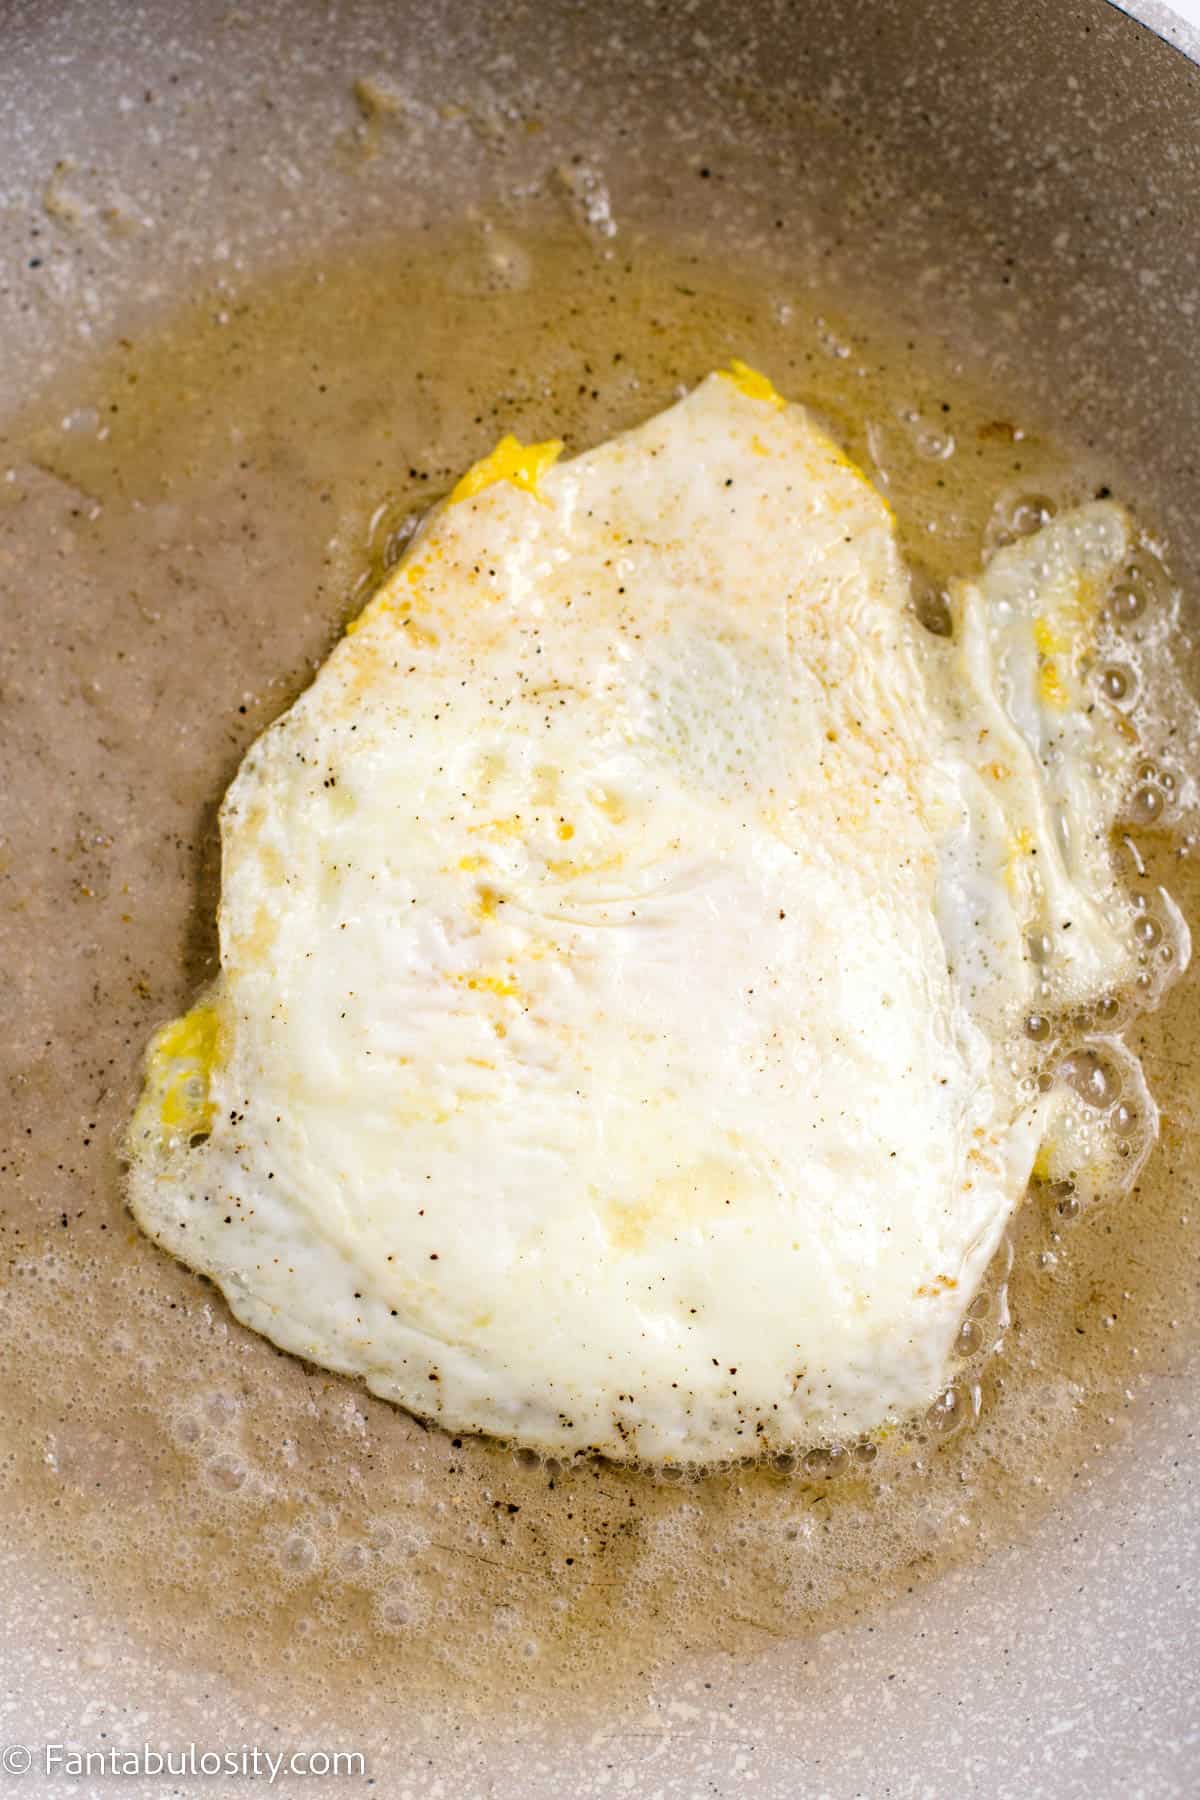 Egg that has been flipped in skillet